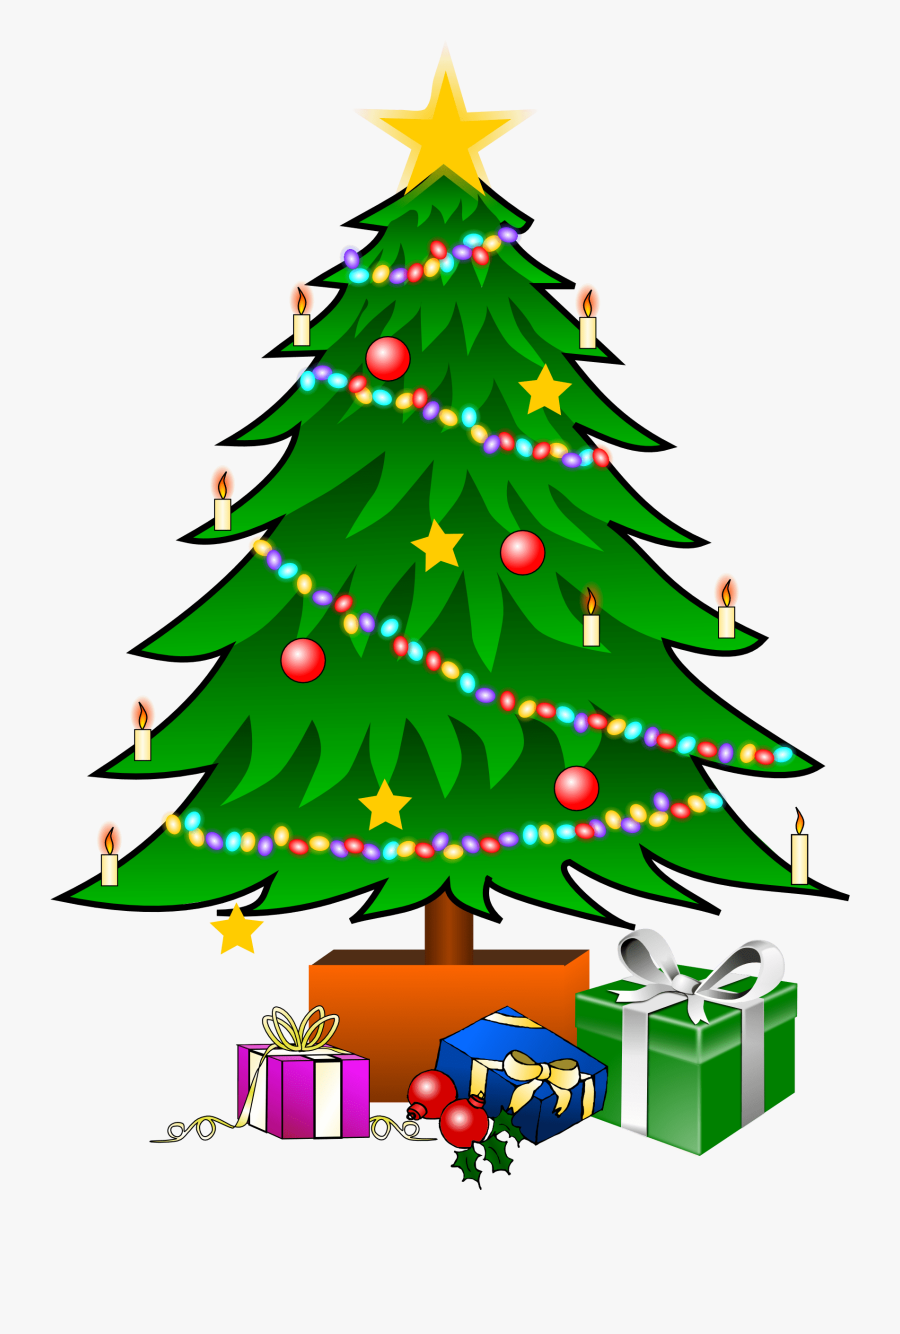 This Nice Christmas Tree With Presents Clip Art Can - X Mas Tree Clipart, Transparent Clipart